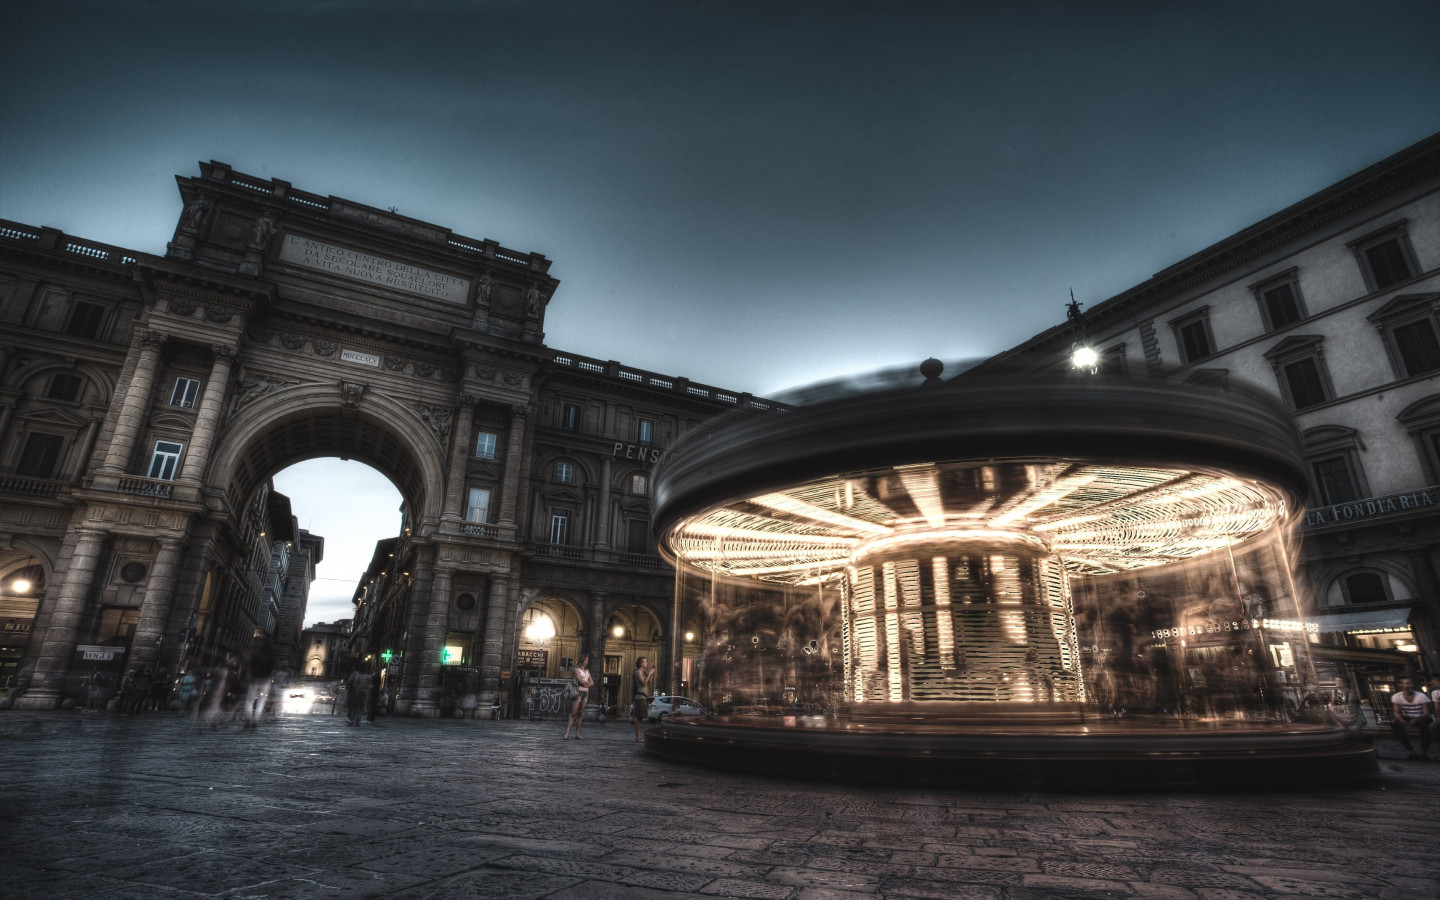 Carousel, people and buildings from Florence wallpaper 1440x900